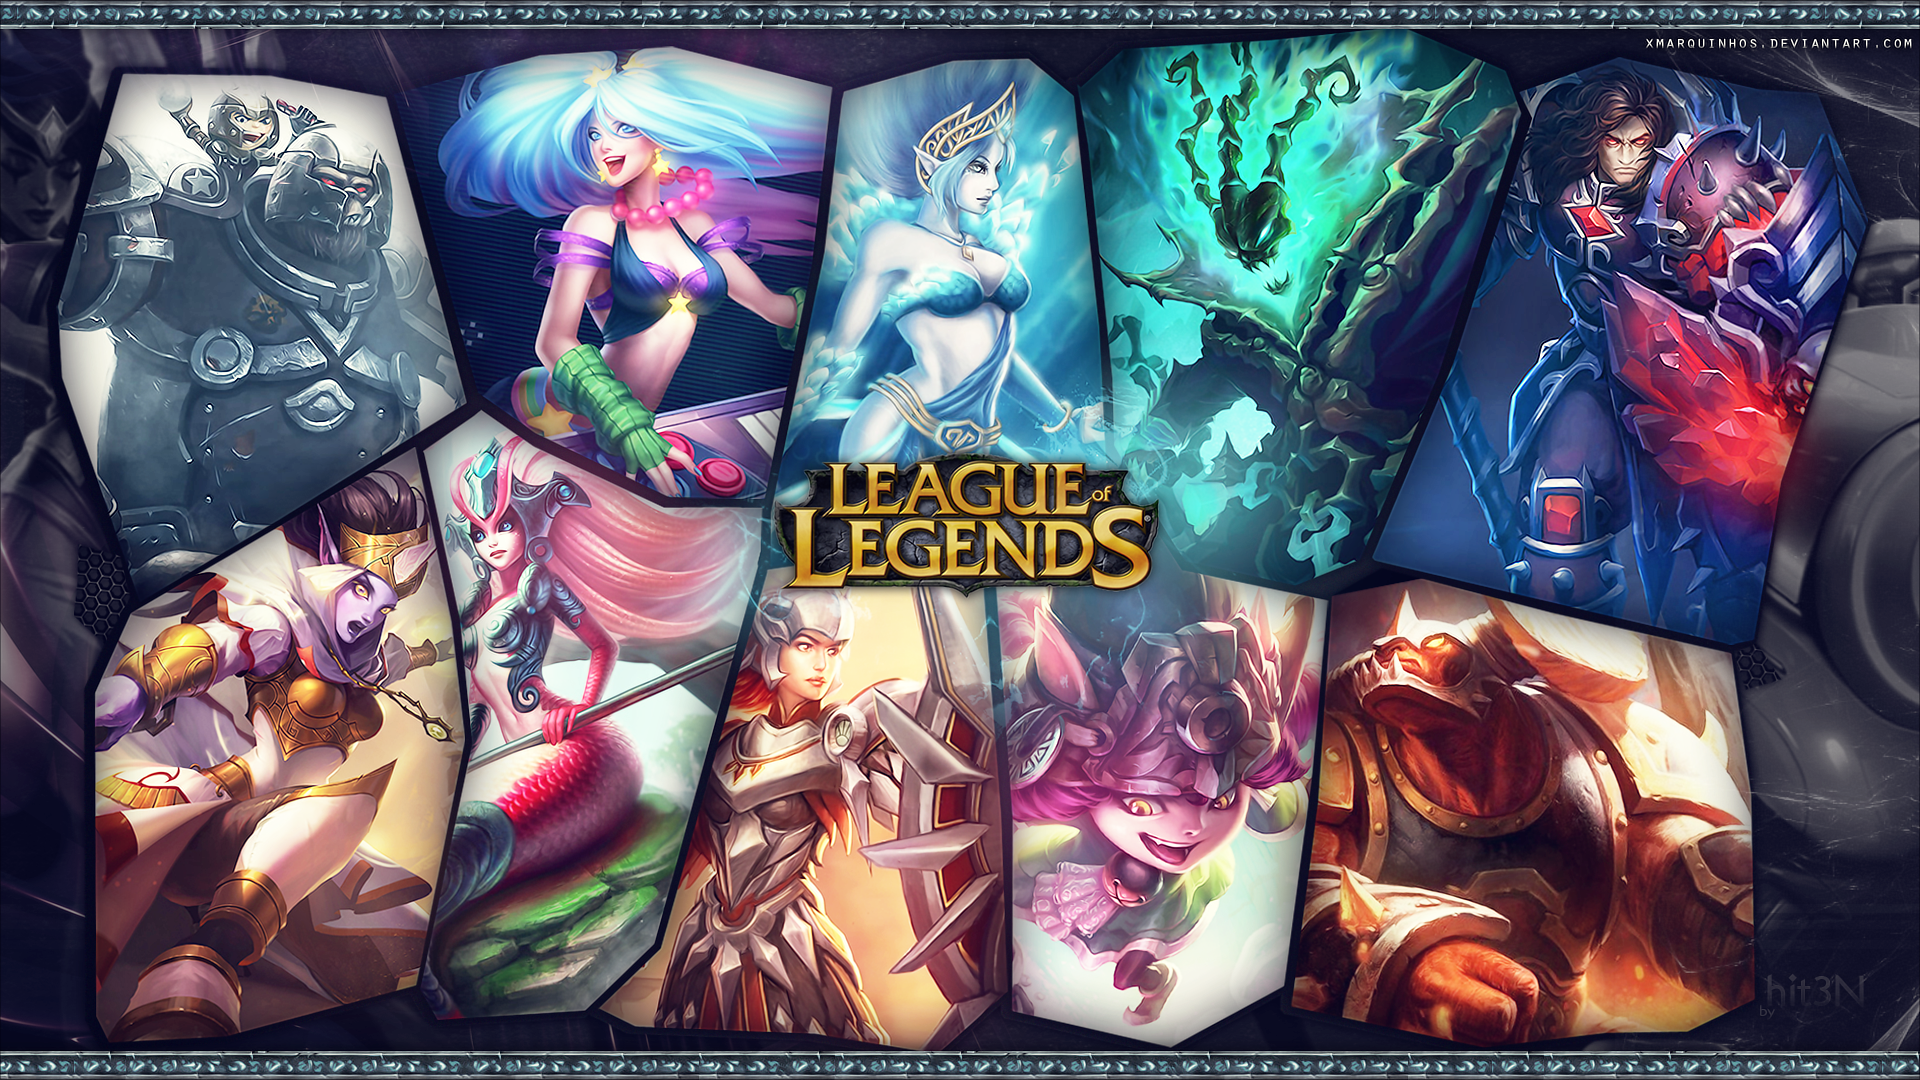 League of Legends   Support Wallpaper2 by hit3N by xMarquinhos on